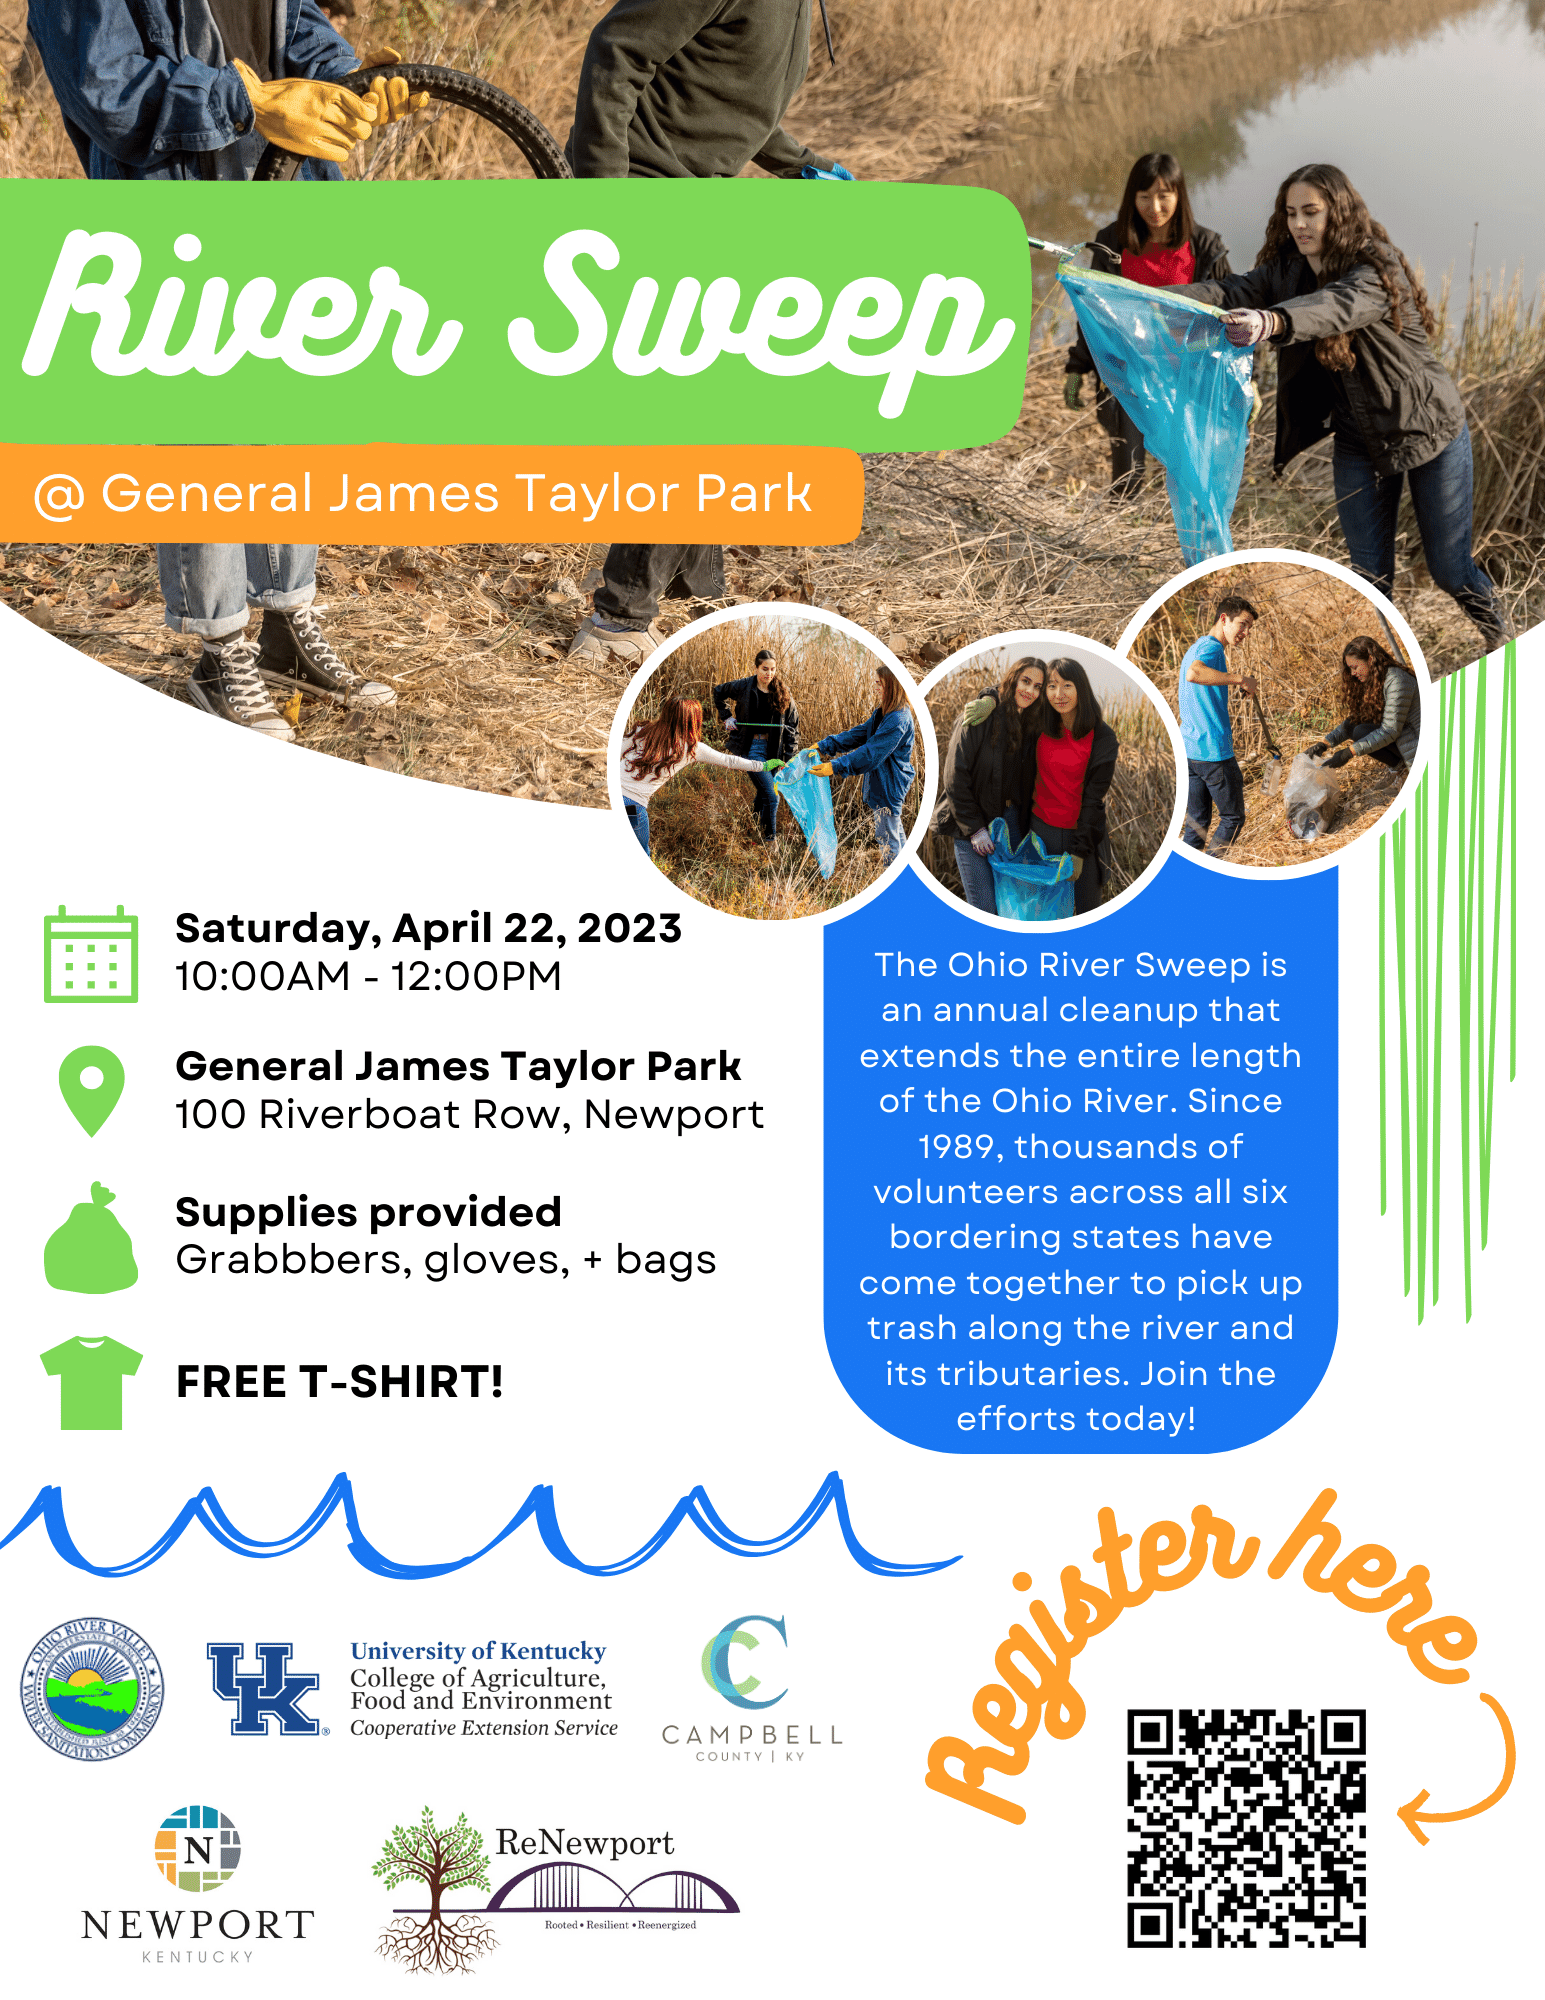 2023 Ohio River Sweep: April 22 10am-12pm at the General James Taylor Park (100 Riverboat Row Newport, KY 41071). Call 859-572-2600 for more information!